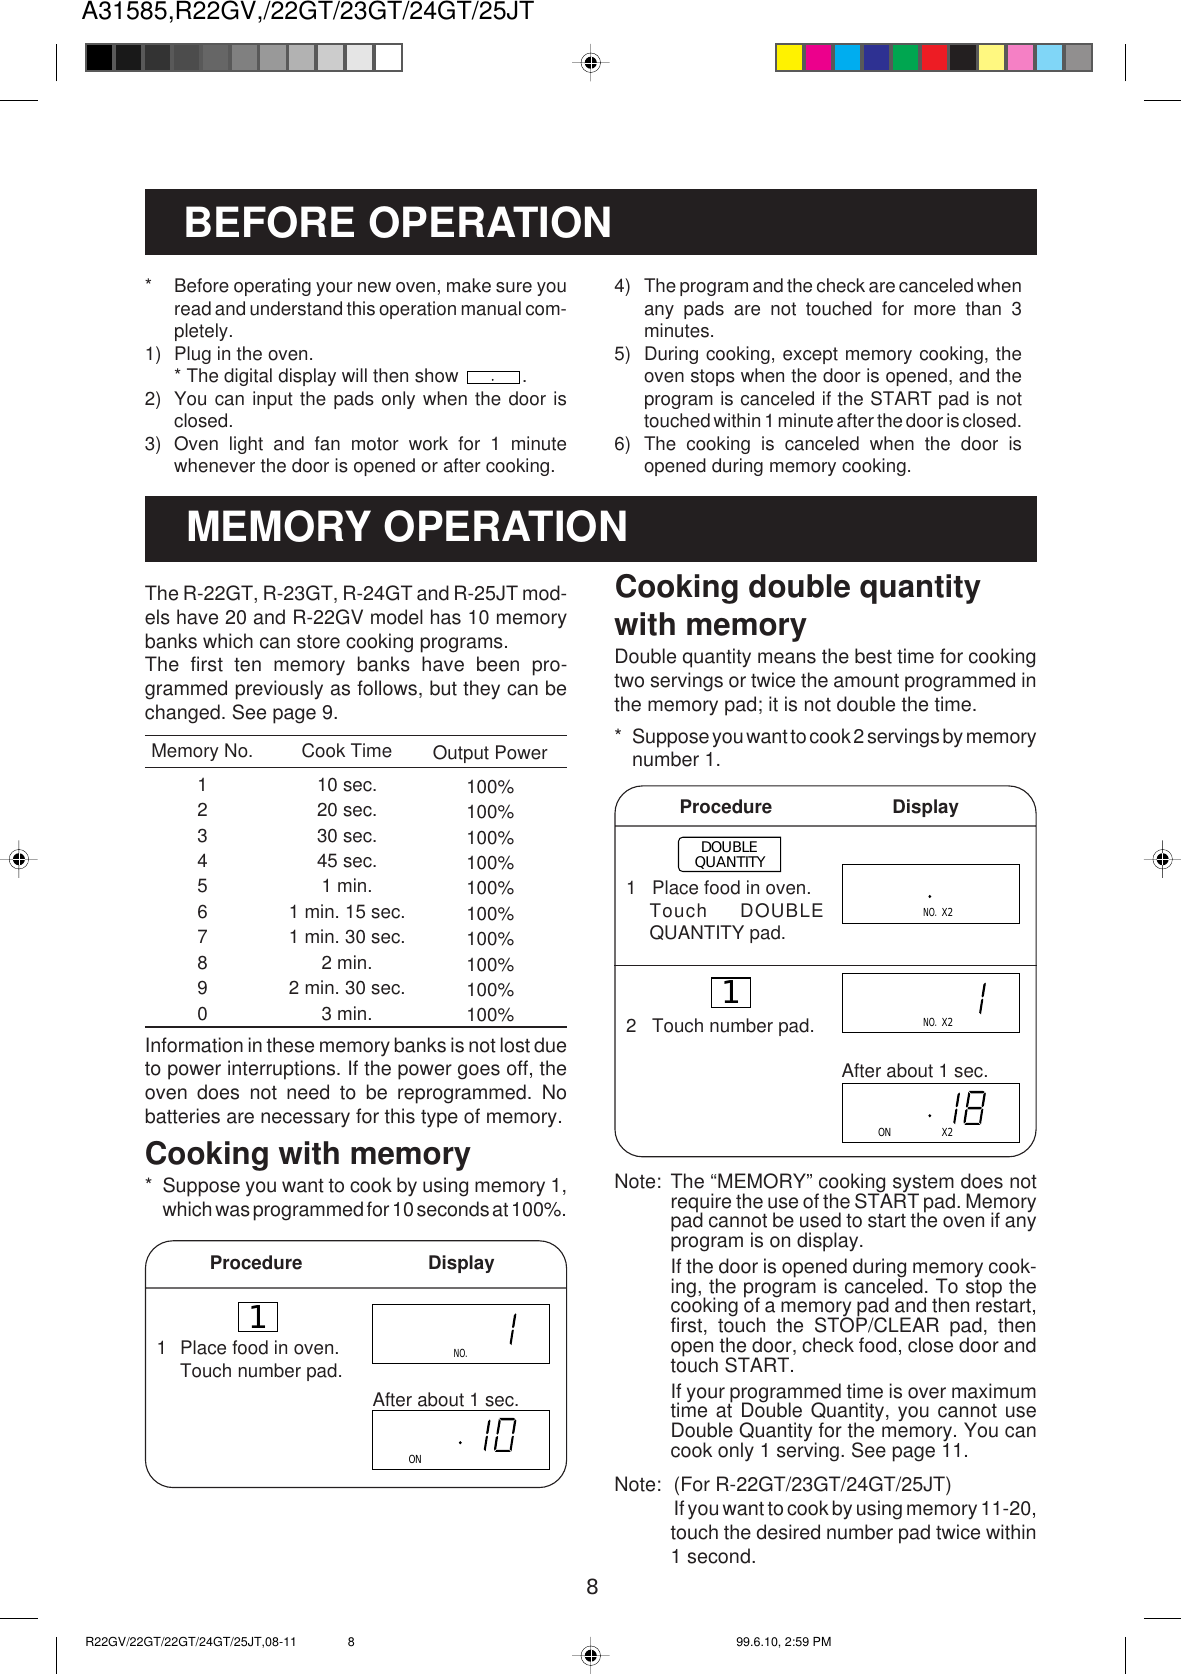 8A31585,R22GV,/22GT/23GT/24GT/25JT1NO.X2NO.X2DOUBLEQUANTITYONNO.1BEFORE OPERATION* Before operating your new oven, make sure youread and understand this operation manual com-pletely.1) Plug in the oven.* The digital display will then show  .2) You can input the pads only when the door isclosed.3) Oven light and fan motor work for 1 minutewhenever the door is opened or after cooking.4) The program and the check are canceled whenany pads are not touched for more than 3minutes.5) During cooking, except memory cooking, theoven stops when the door is opened, and theprogram is canceled if the START pad is nottouched within 1 minute after the door is closed.6) The cooking is canceled when the door isopened during memory cooking.MEMORY OPERATIONThe R-22GT, R-23GT, R-24GT and R-25JT mod-els have 20 and R-22GV model has 10 memorybanks which can store cooking programs.The first ten memory banks have been pro-grammed previously as follows, but they can bechanged. See page 9.Memory No.1234567890Cook Time10 sec.20 sec.30 sec.45 sec.1 min.1 min. 15 sec.1 min. 30 sec.2 min.2 min. 30 sec.3 min.Output Power100%100%100%100%100%100%100%100%100%100%Information in these memory banks is not lost dueto power interruptions. If the power goes off, theoven does not need to be reprogrammed. Nobatteries are necessary for this type of memory.Cooking with memory* Suppose you want to cook by using memory 1,which was programmed for 10 seconds at 100%.Procedure          DisplayCooking double quantitywith memoryDouble quantity means the best time for cookingtwo servings or twice the amount programmed inthe memory pad; it is not double the time.* Suppose you want to cook 2 servings by memorynumber 1.Procedure         DisplayNote: The “MEMORY” cooking system does notrequire the use of the START pad. Memorypad cannot be used to start the oven if anyprogram is on display.If the door is opened during memory cook-ing, the program is canceled. To stop thecooking of a memory pad and then restart,first, touch the STOP/CLEAR pad, thenopen the door, check food, close door andtouch START.If your programmed time is over maximumtime at Double Quantity, you cannot useDouble Quantity for the memory. You cancook only 1 serving. See page 11.Note: (For R-22GT/23GT/24GT/25JT)If you want to cook by using memory 11-20,touch the desired number pad twice within1 second.After about 1 sec.ON X2After about 1 sec.1 Place food in oven.Touch number pad.1   Place food in oven.Touch DOUBLEQUANTITY pad.2   Touch number pad.R22GV/22GT/22GT/24GT/25JT,08-11 99.6.10, 2:59 PM8